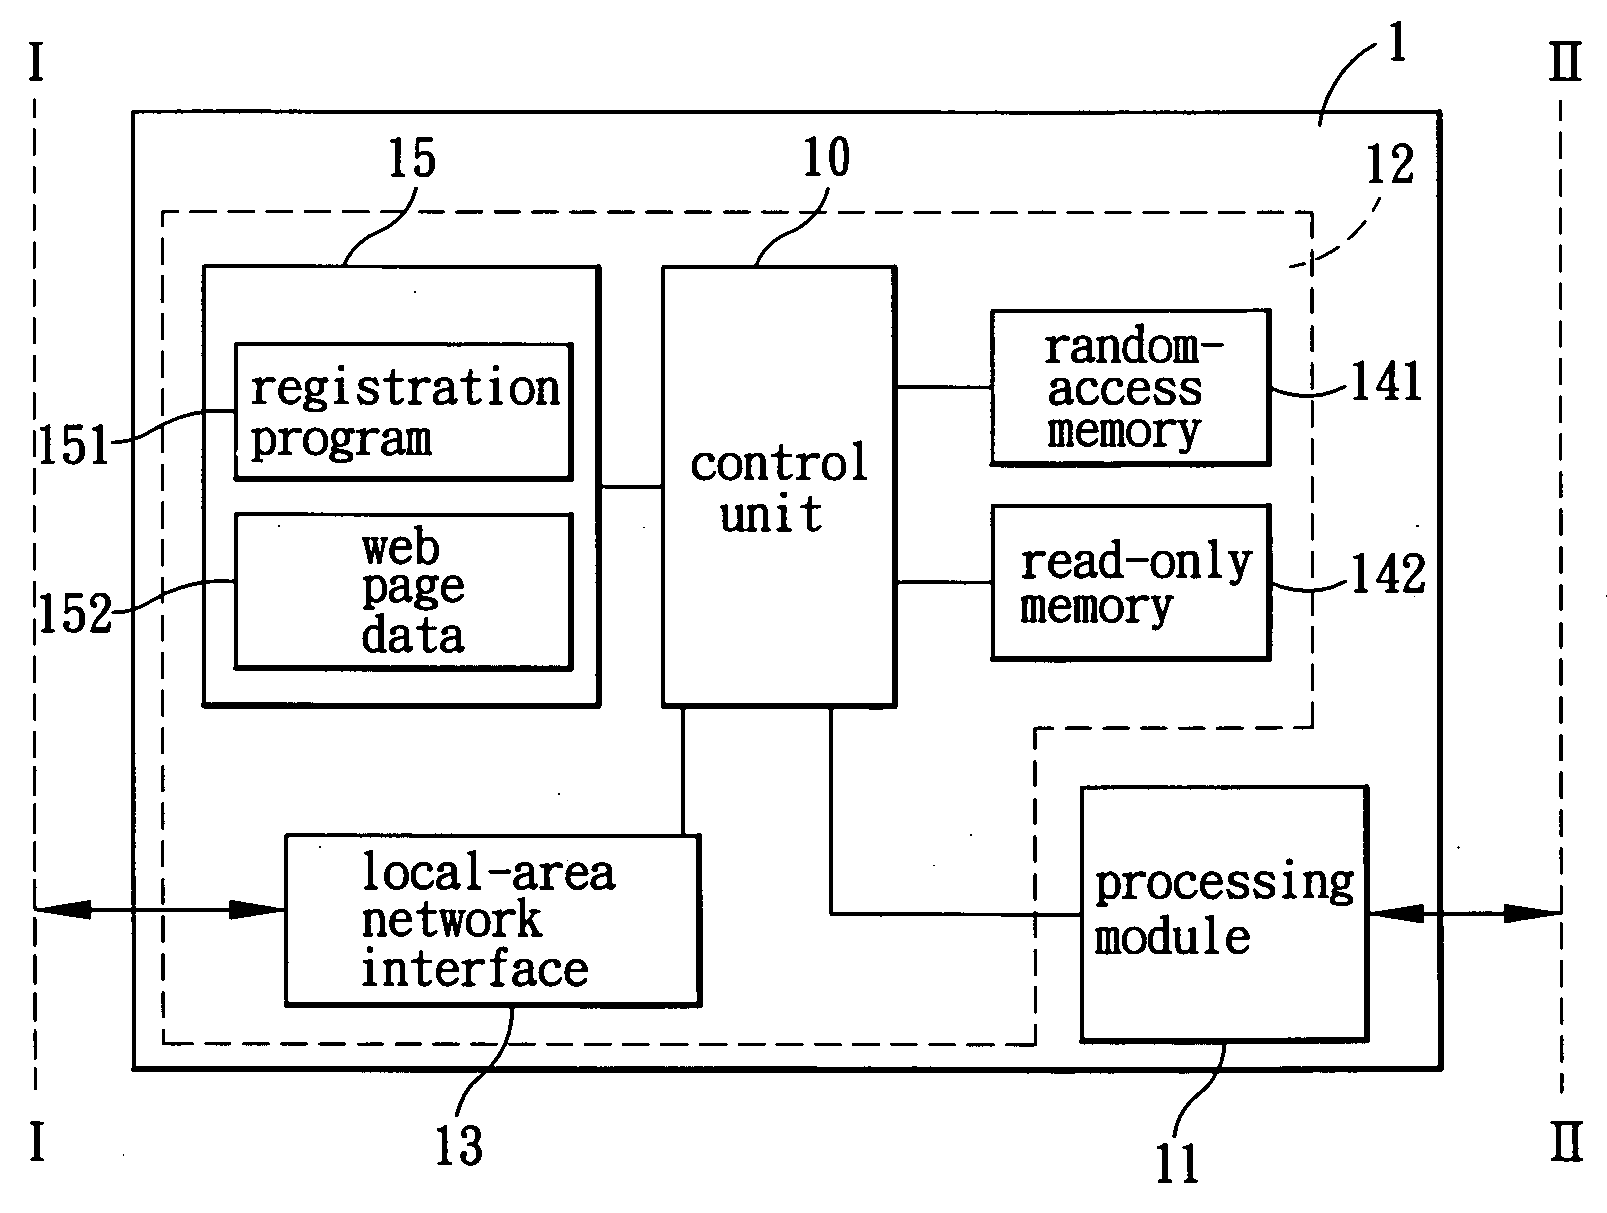 Method for registering a domain name and signing up with a search website using a computer network service provider on behalf of a user, and a modem